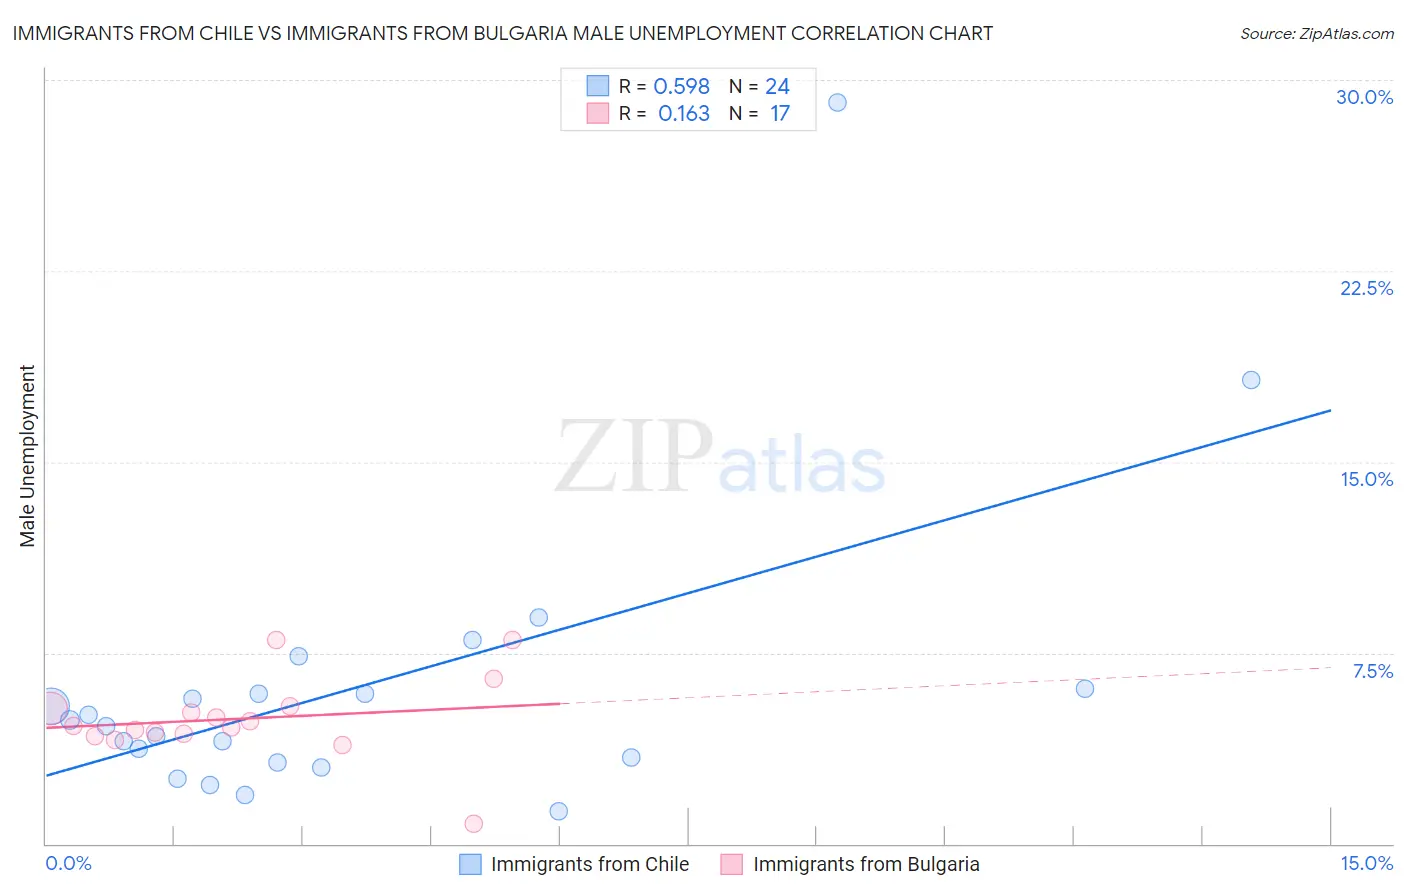 Immigrants from Chile vs Immigrants from Bulgaria Male Unemployment